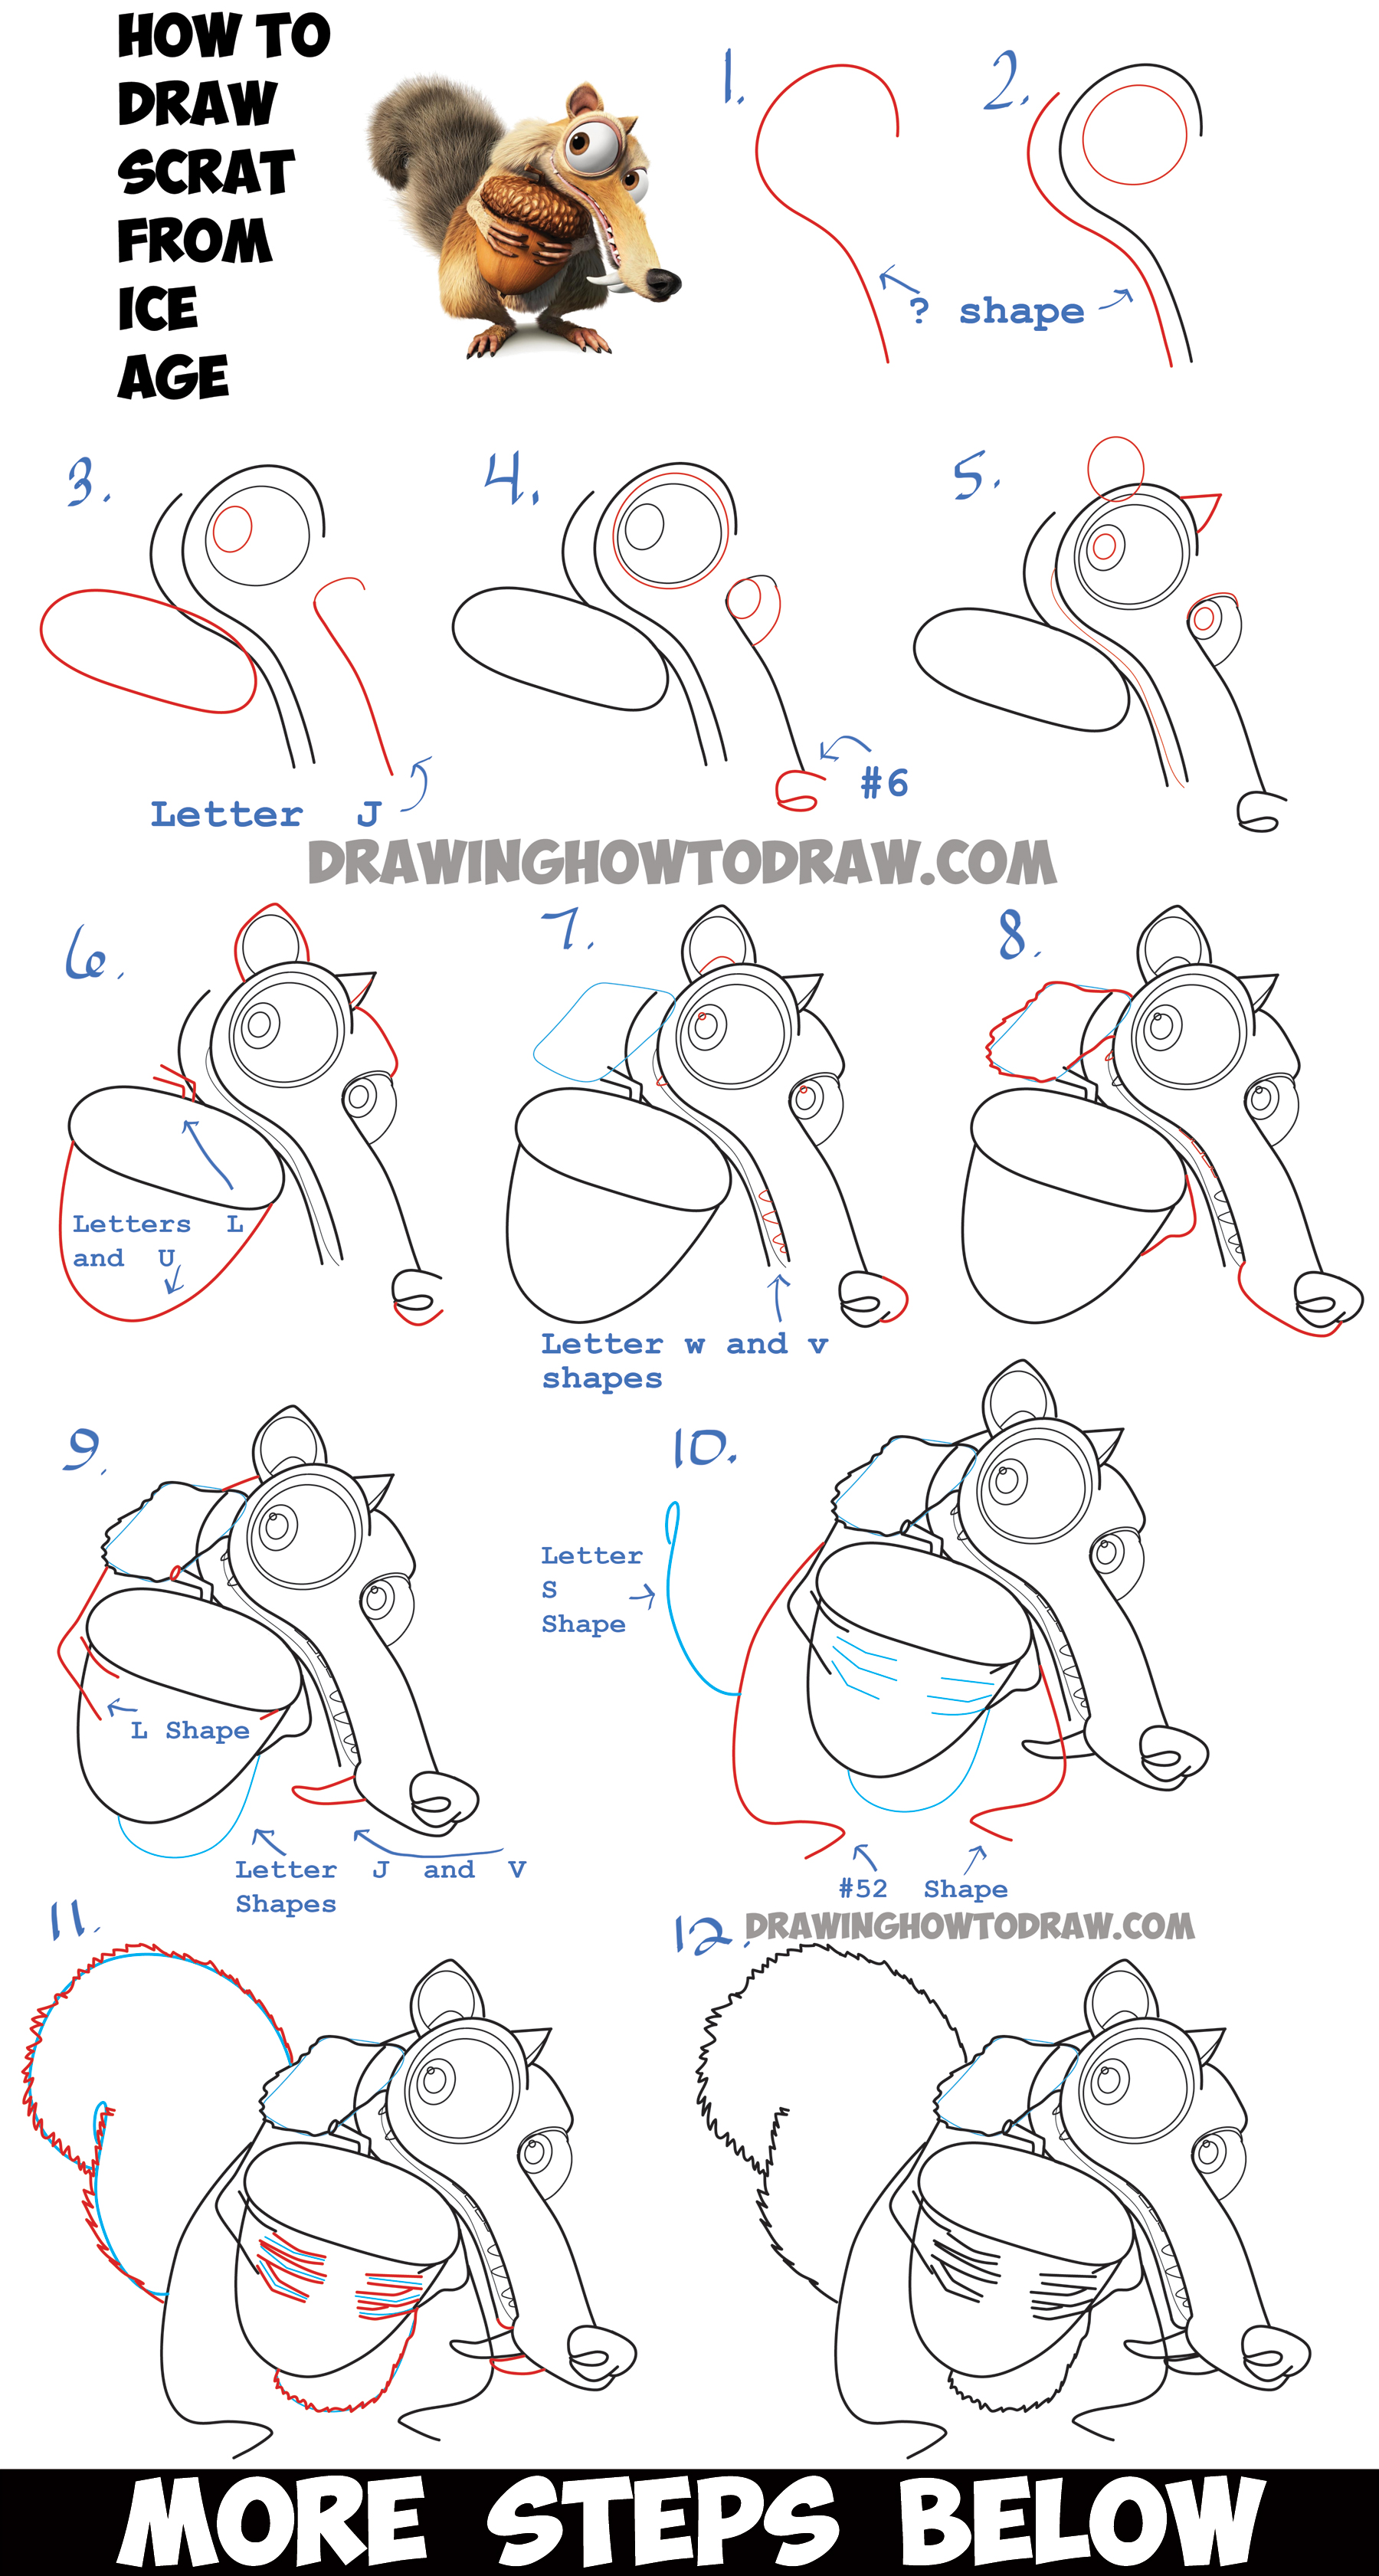 How to Draw Scrat the Squirrel from Ice Age - Step by Step Drawing Tutorial